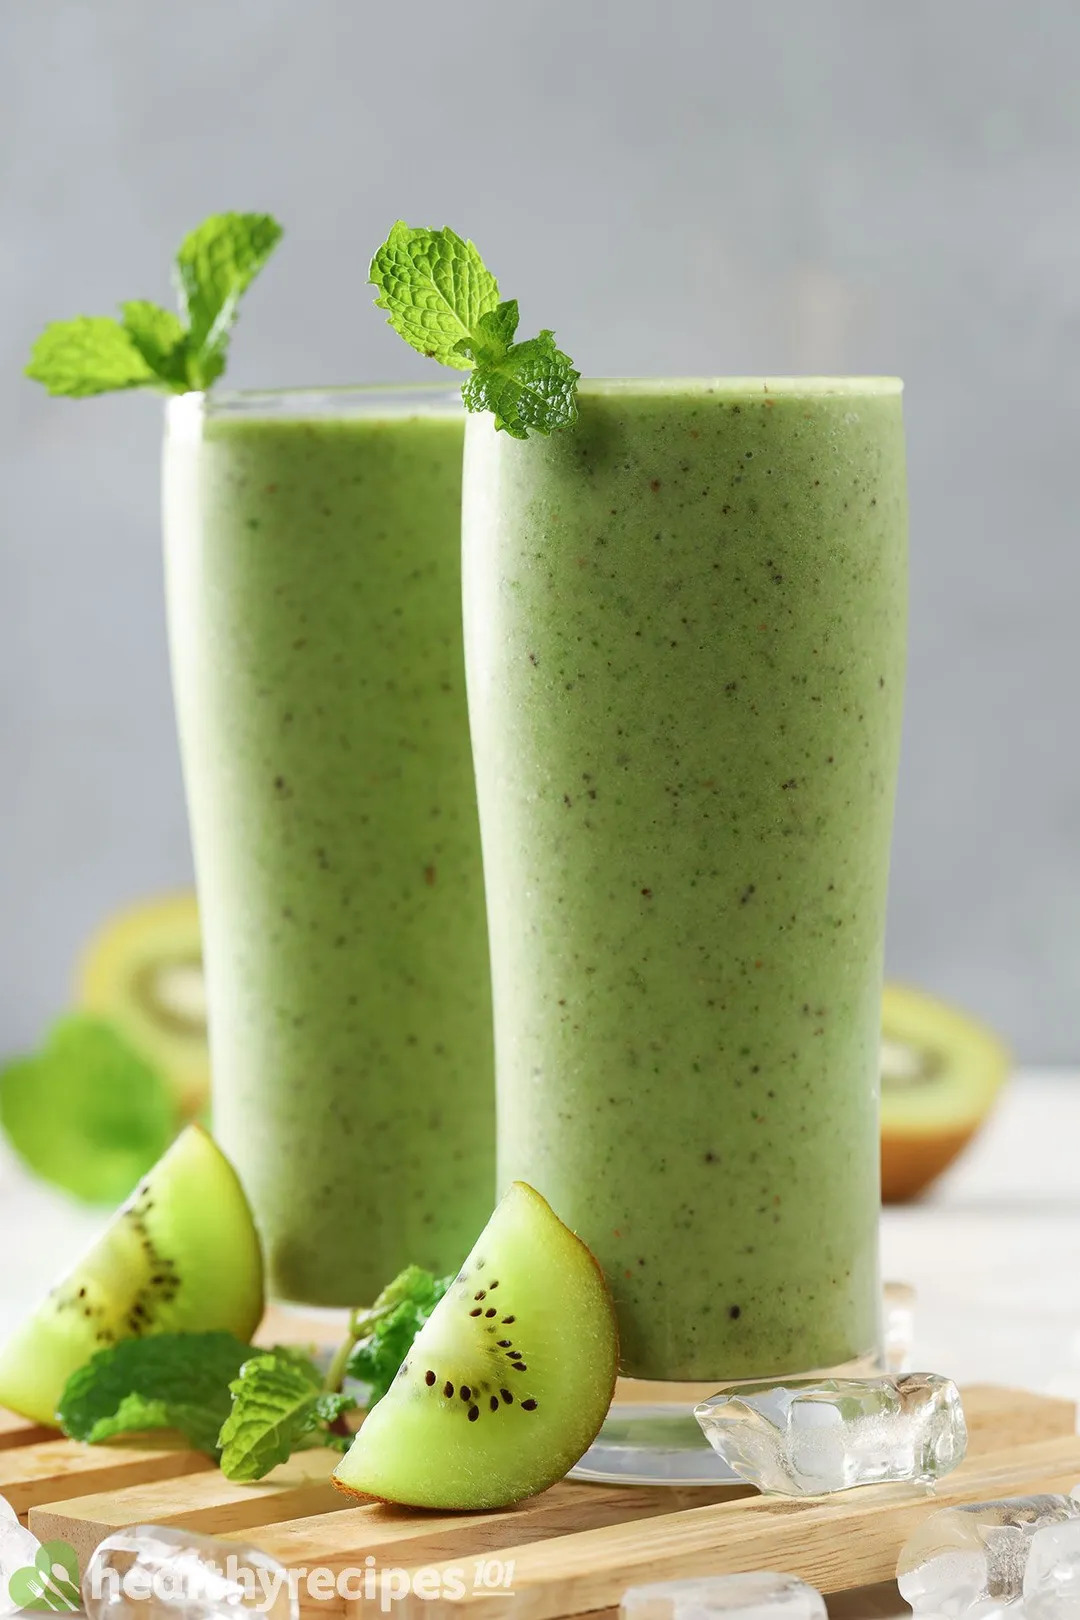 Two tall glasses of kiwi smoothie placed on a wooden platform near slices of green kiwi and mint leaves.